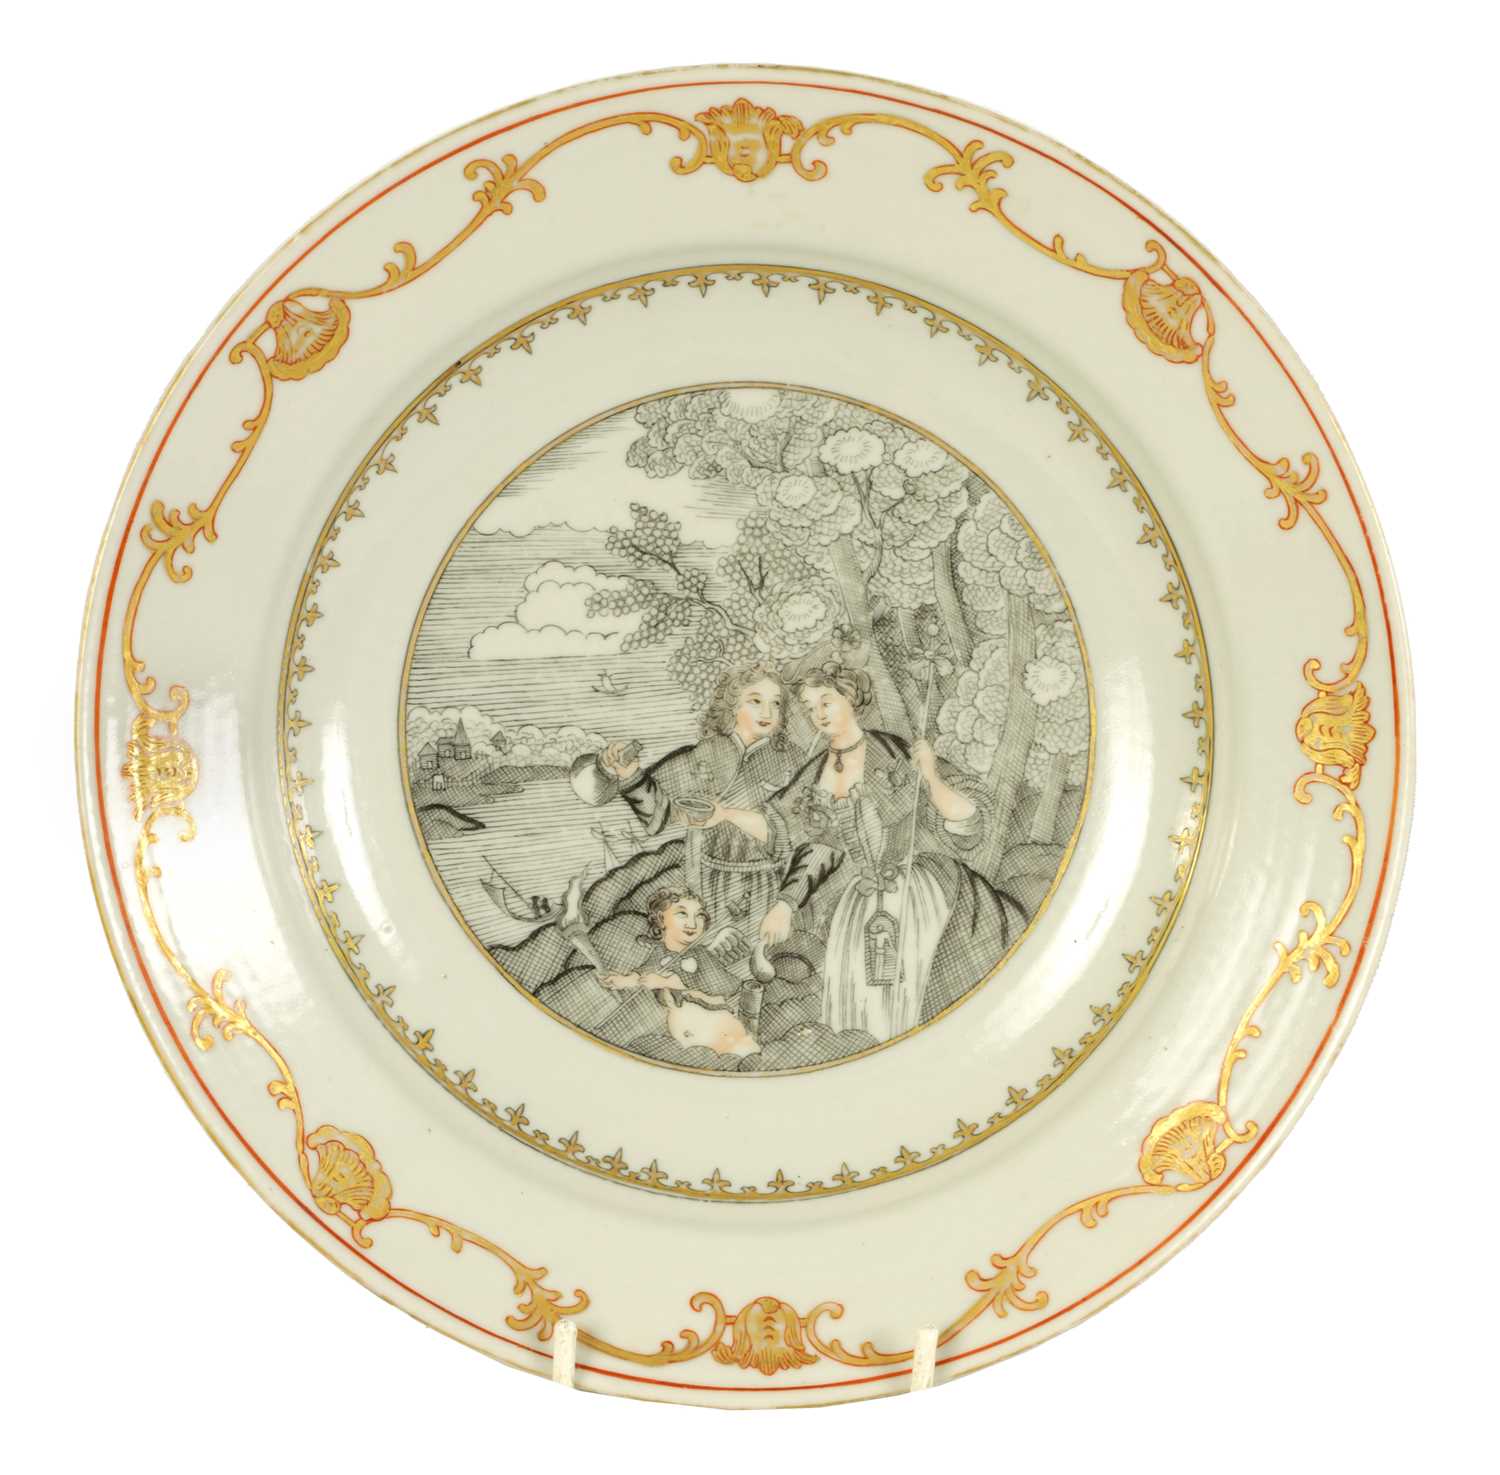 Lot 151 - A MID 18TH CENTURY CHINESE EXPORT PORCELAIN PLATE PAINTED EN GRISAILLE WITH EUROPEAN FIGURAL SCENE TO THE CENTRE